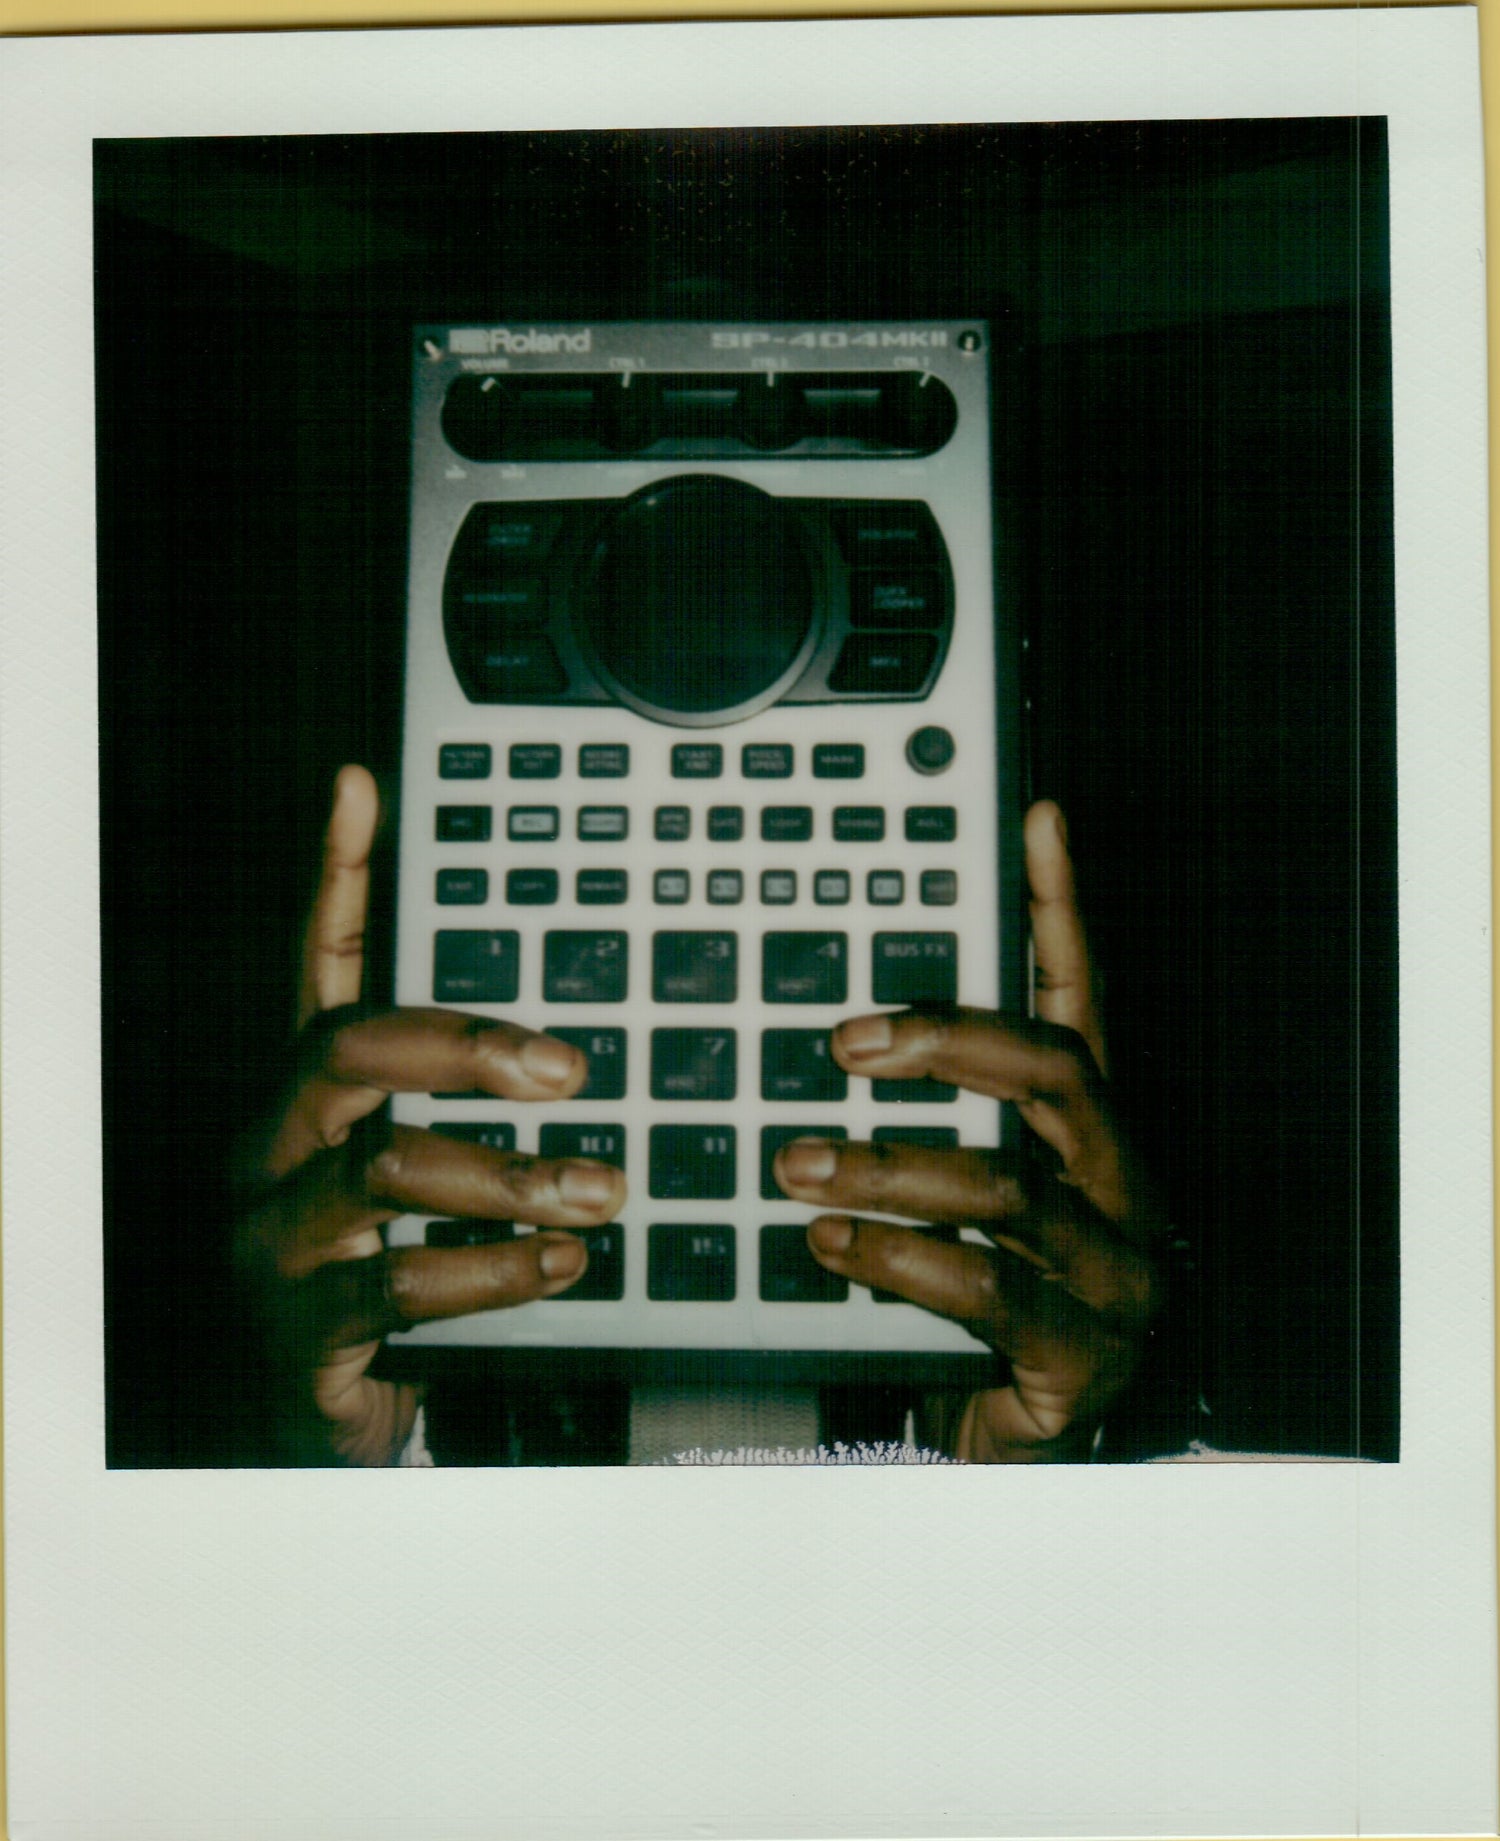 UK based producer Eahwee on MPC ONE